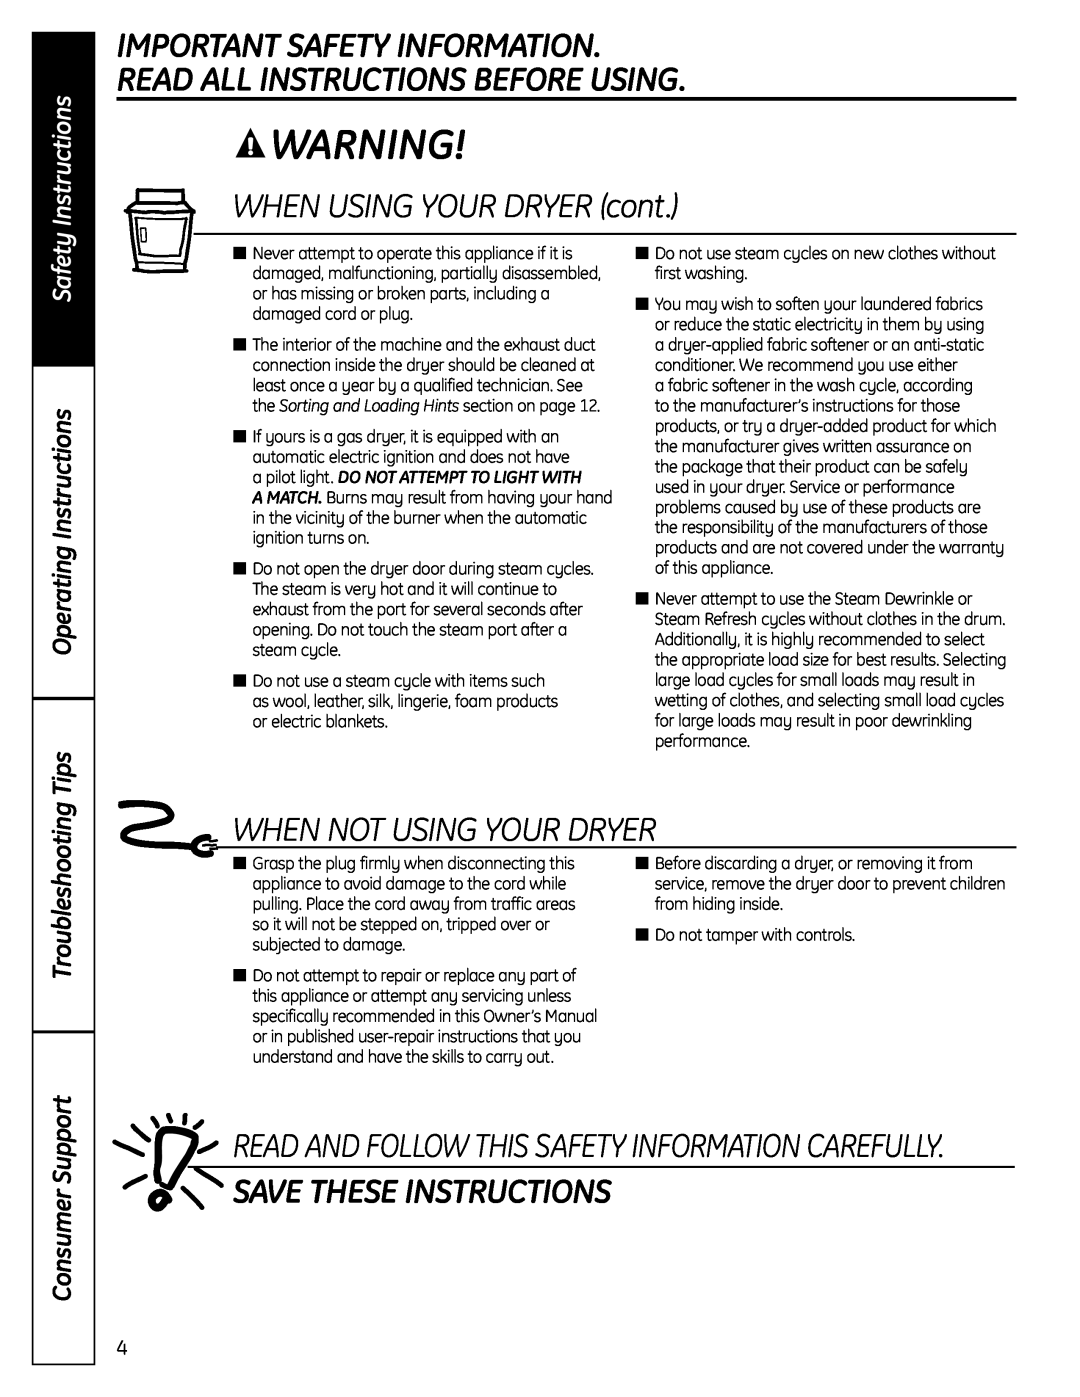 GE UPVH890 WHEN USING YOUR DRYER cont, When Not Using Your Dryer, Save These Instructions, Operating Instructions, Tips 